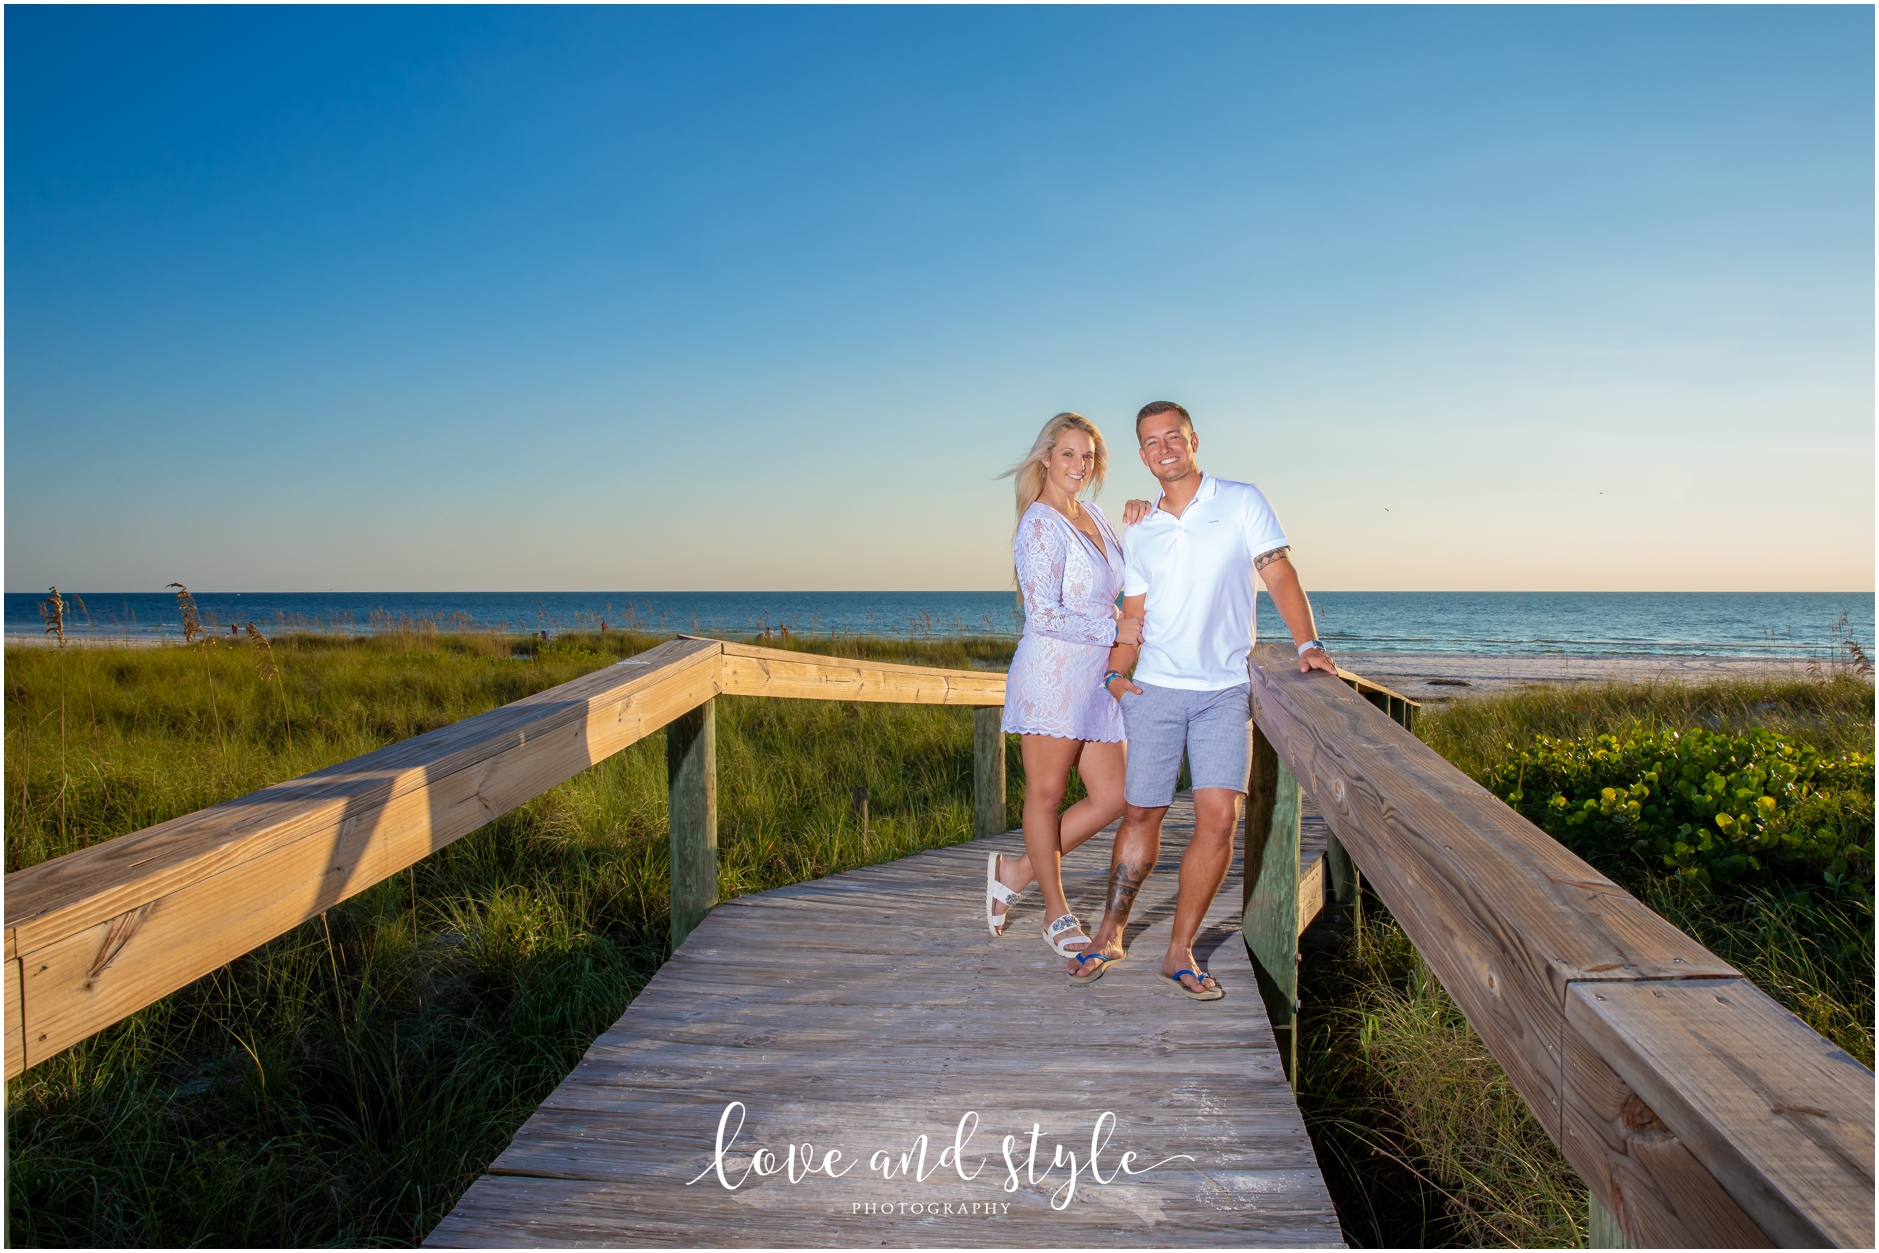 AMI Engagement Photography with couple in white and blue at the beach during the sunset hour